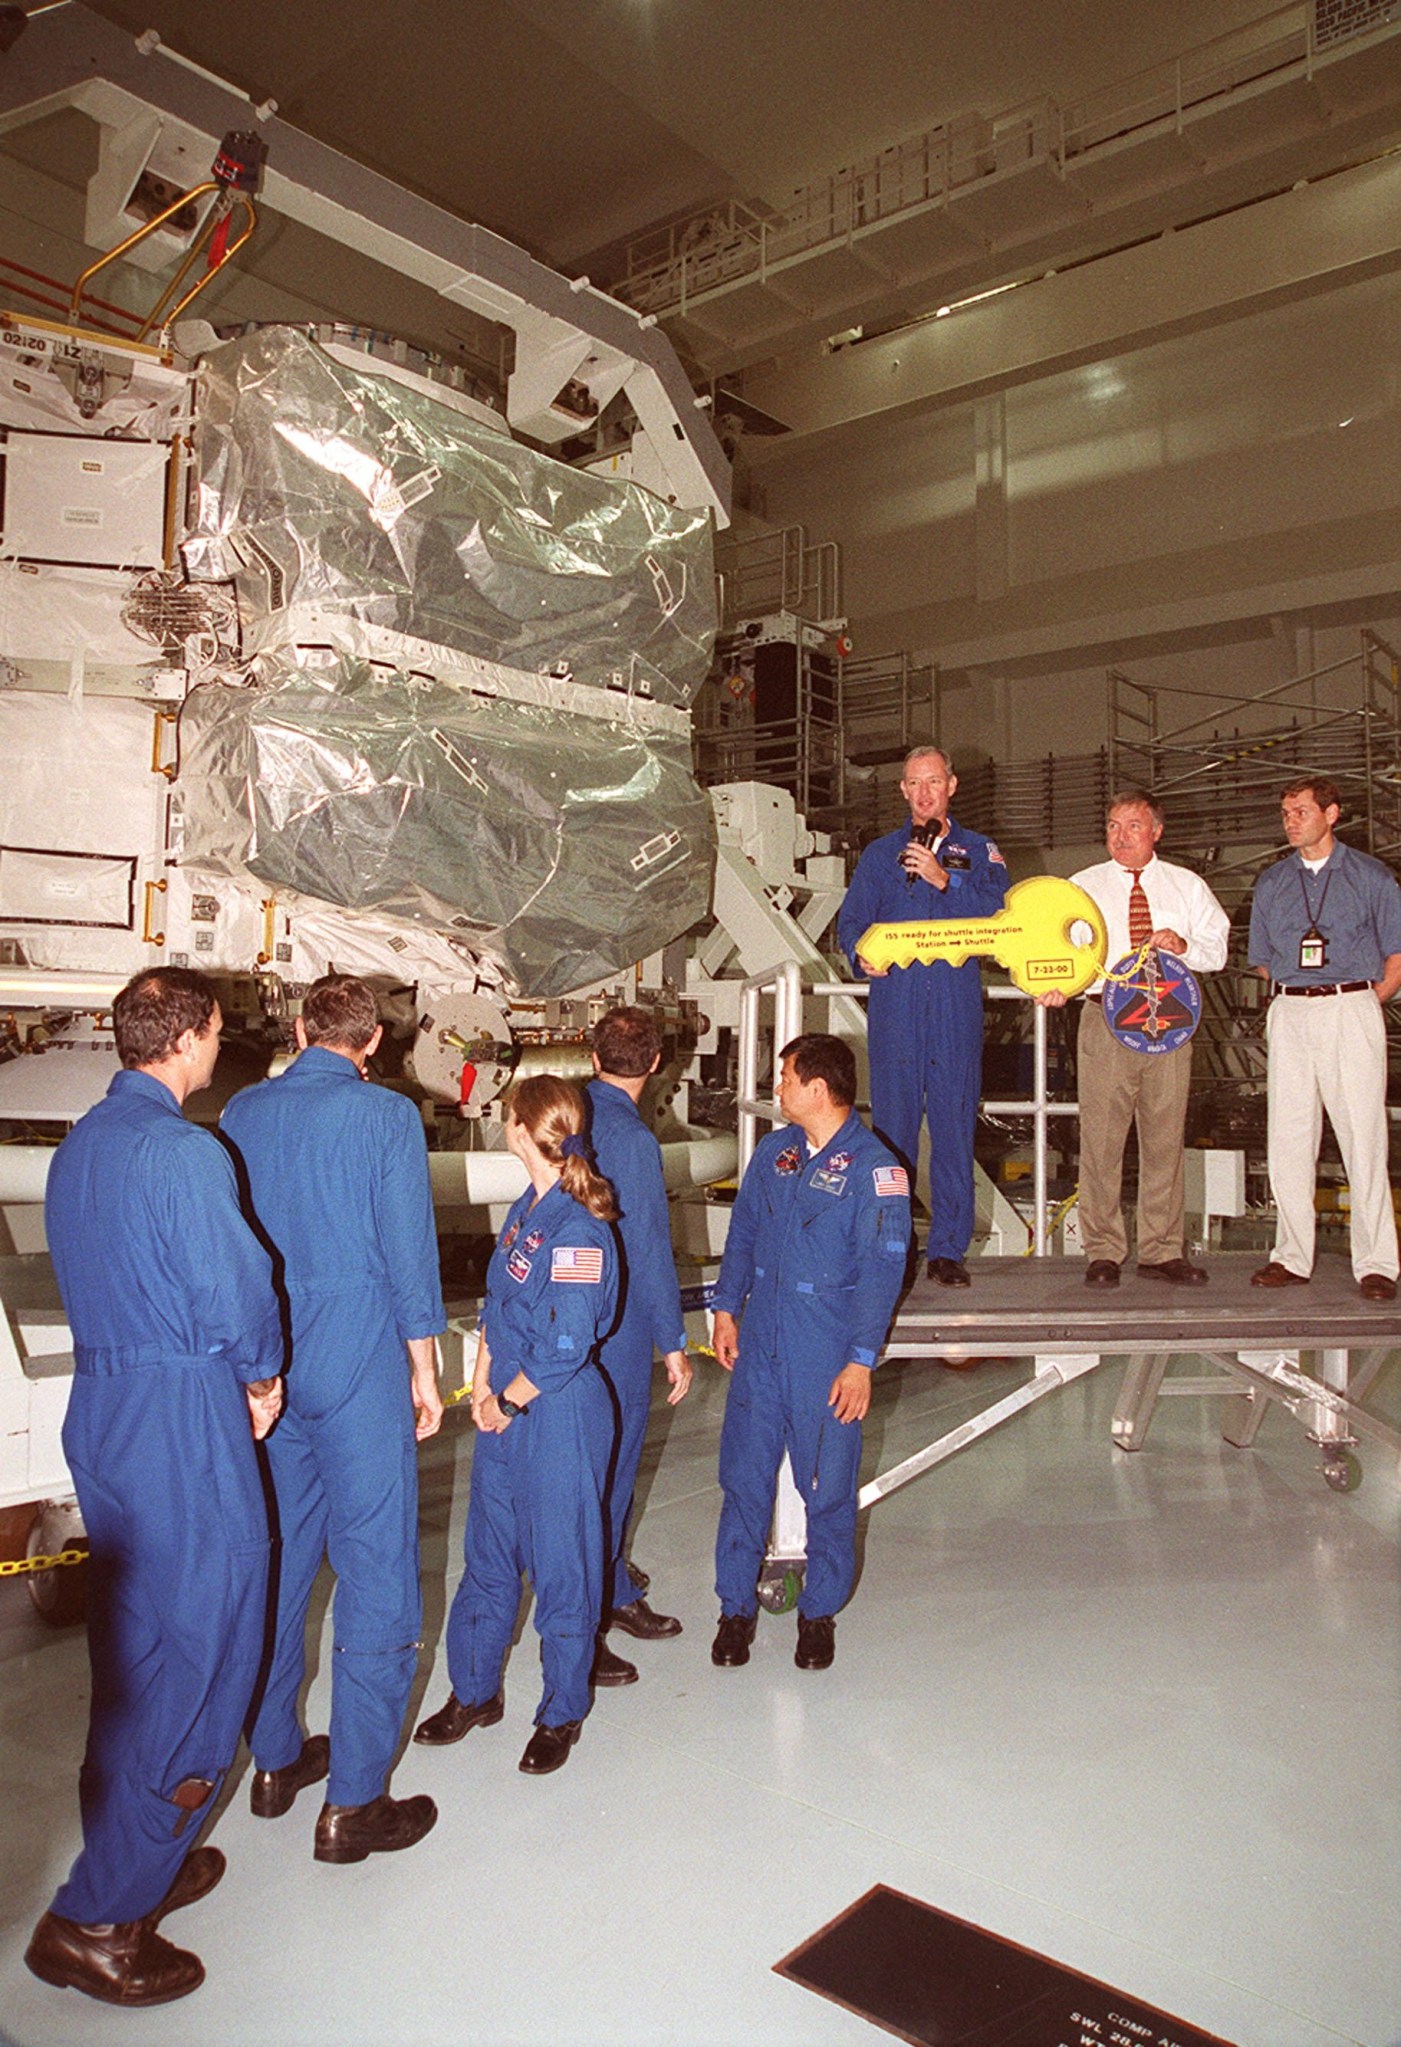 The Zenith-1 Truss for the International Space Station is presented to NASA by Boeing in 2000.